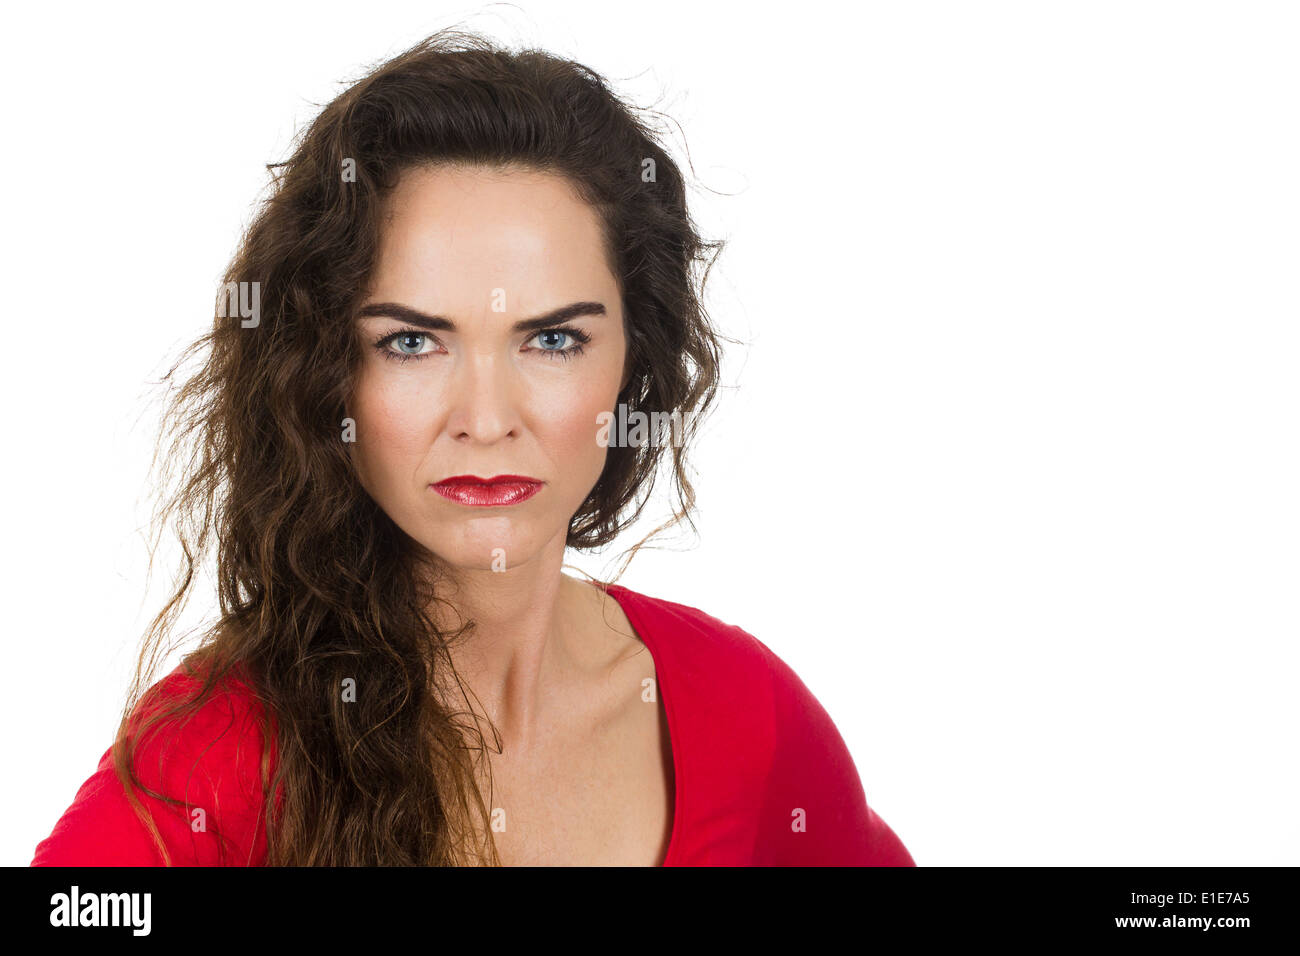 A very annoyed angry and irritated woman. Isolated on white. Stock Photo